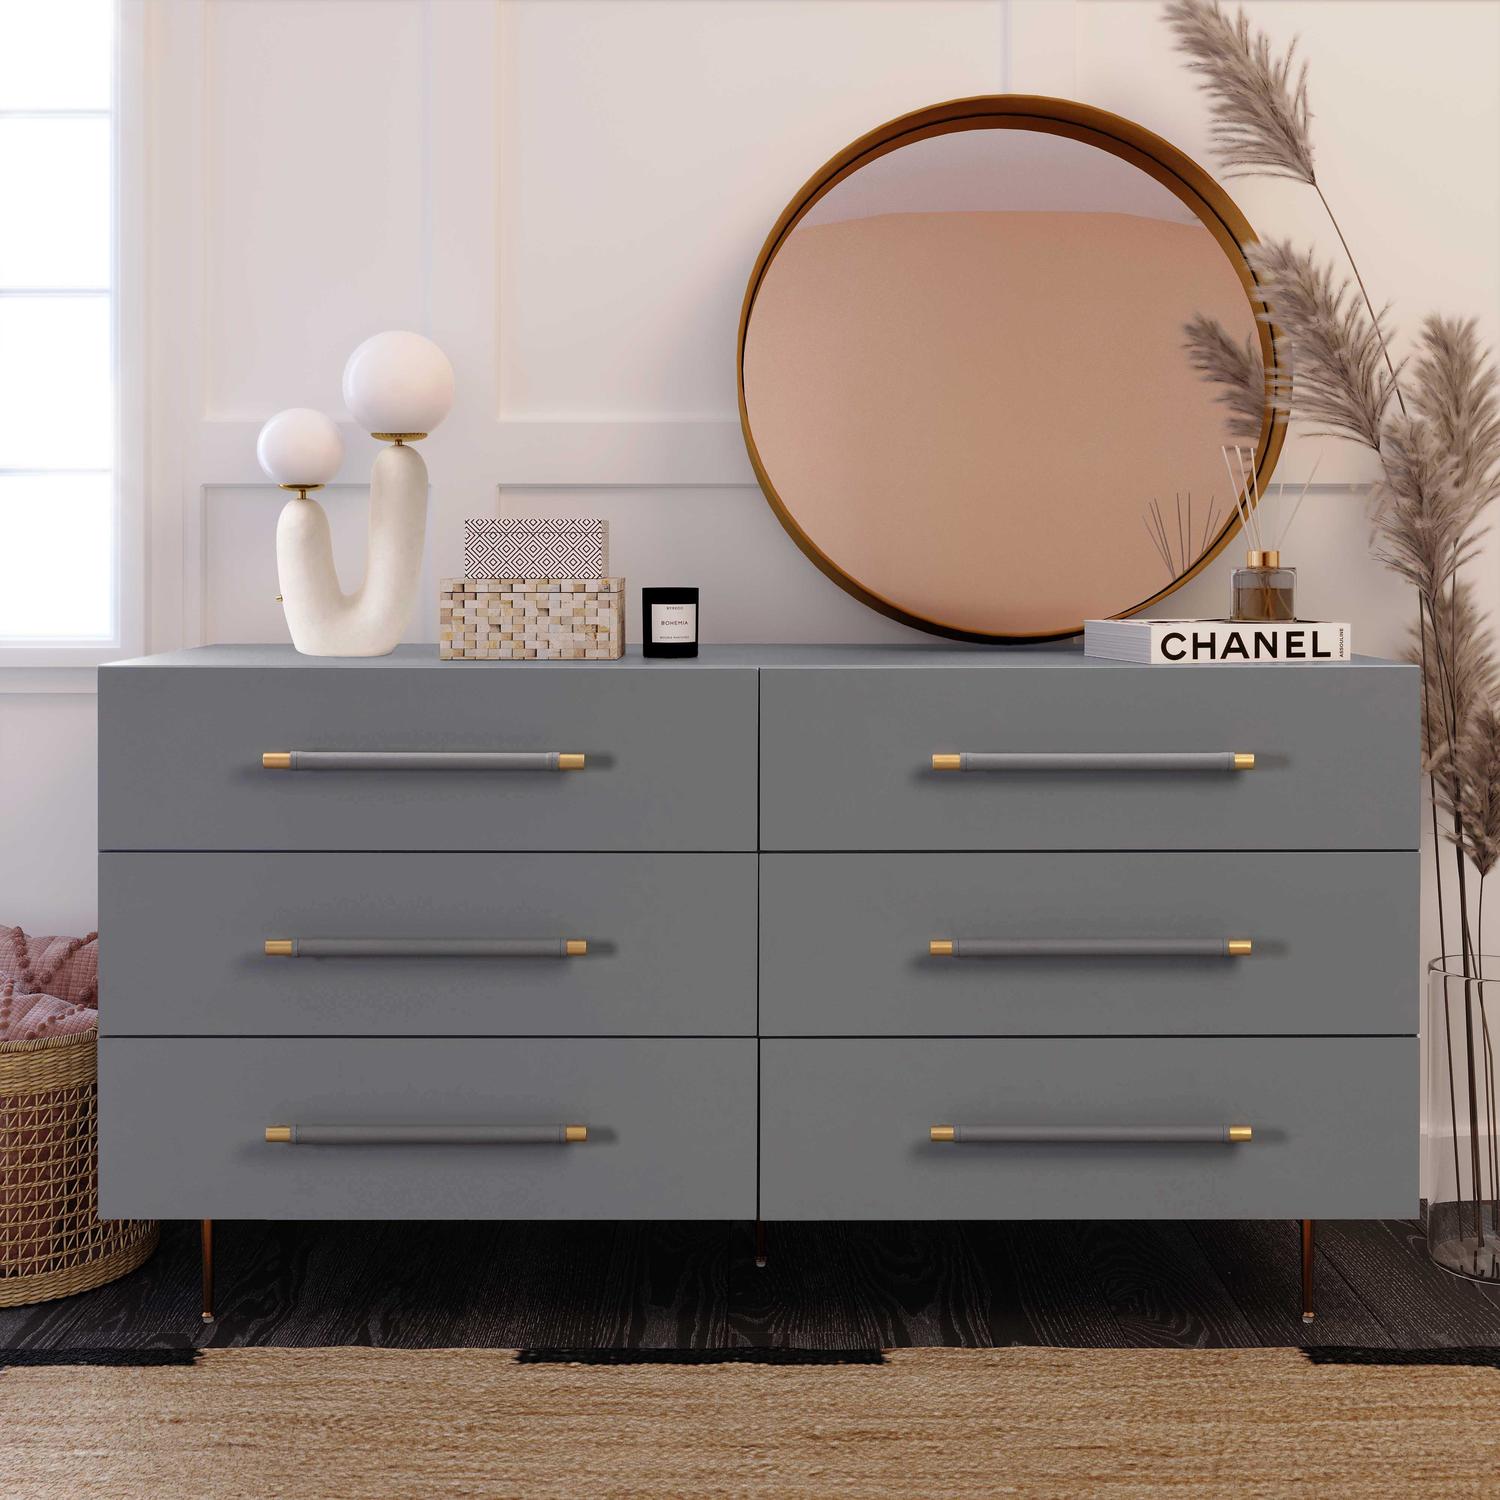 small chest with drawers Tov Furniture Dressers Grey